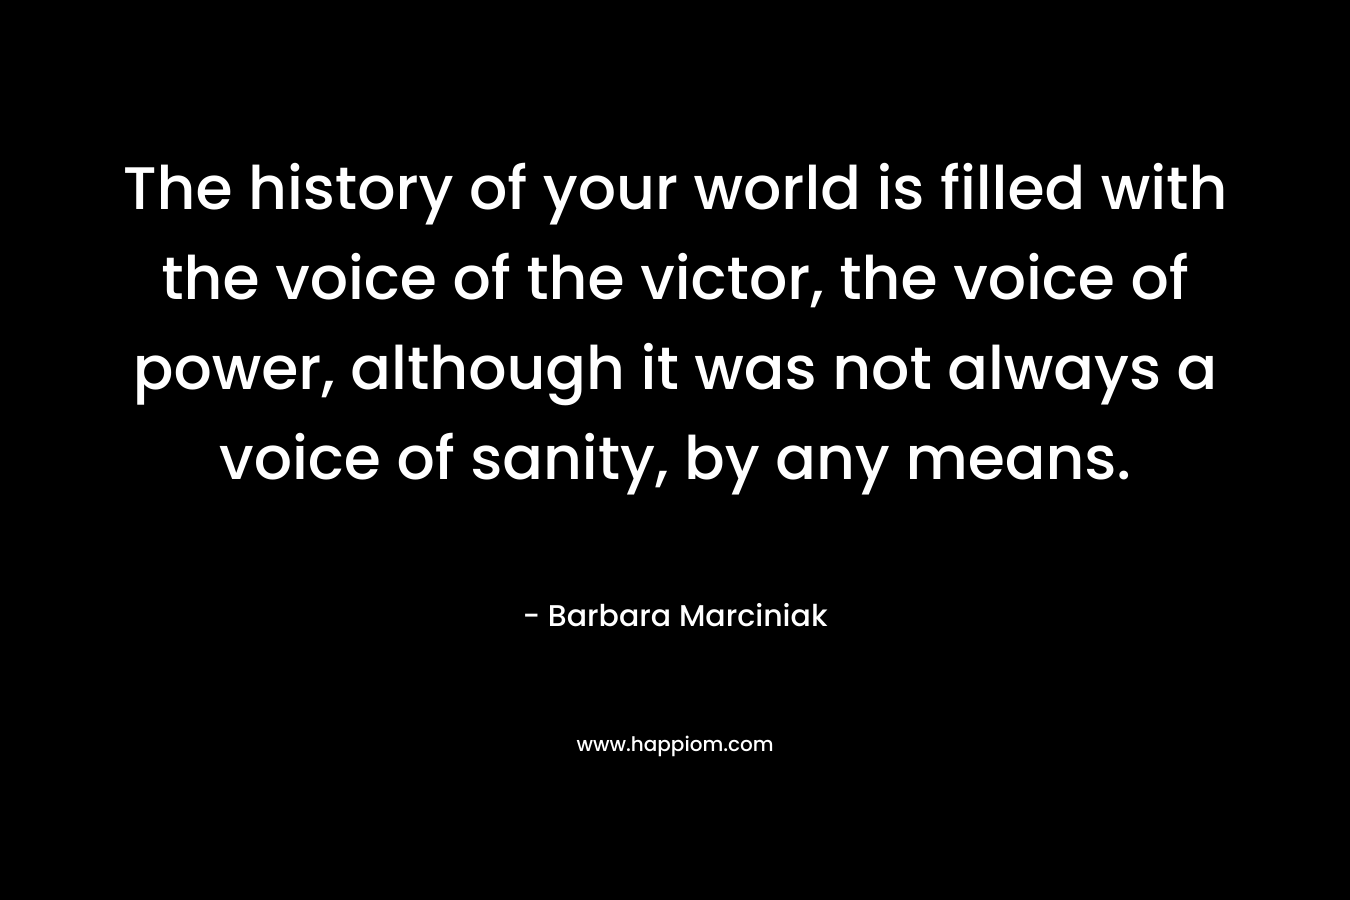 The history of your world is filled with the voice of the victor, the voice of power, although it was not always a voice of sanity, by any means. – Barbara Marciniak